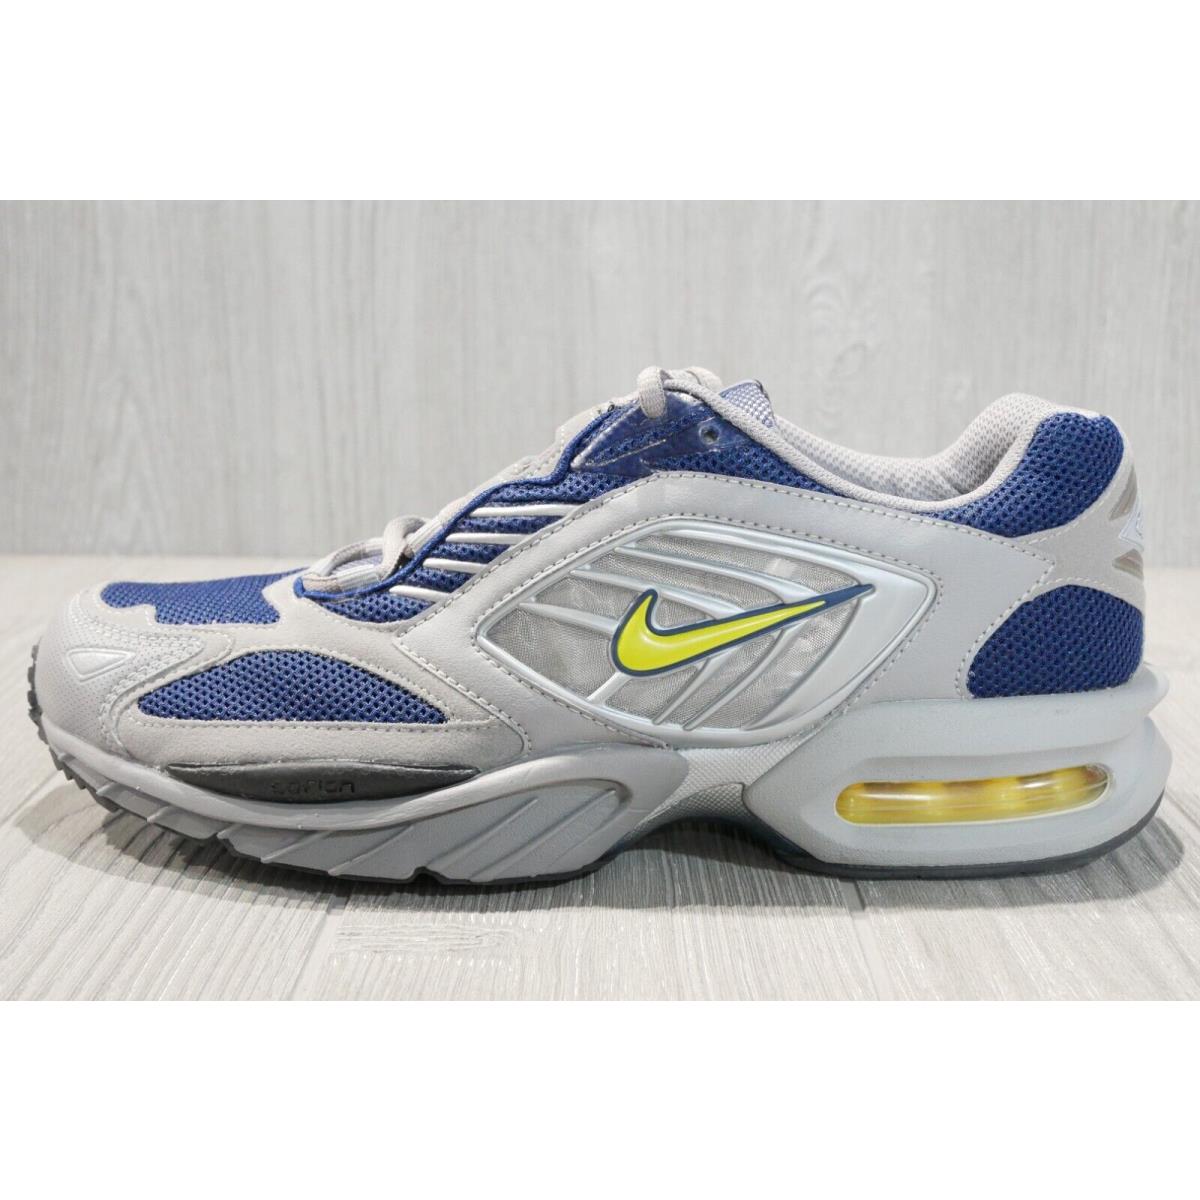 Scheiding projector koppeling Vintage Nike Air Max Moto Grey Running Shoes 2002 Mens Size 11.5 Oss |  883212104830 - Nike shoes Air Max - grey | SporTipTop